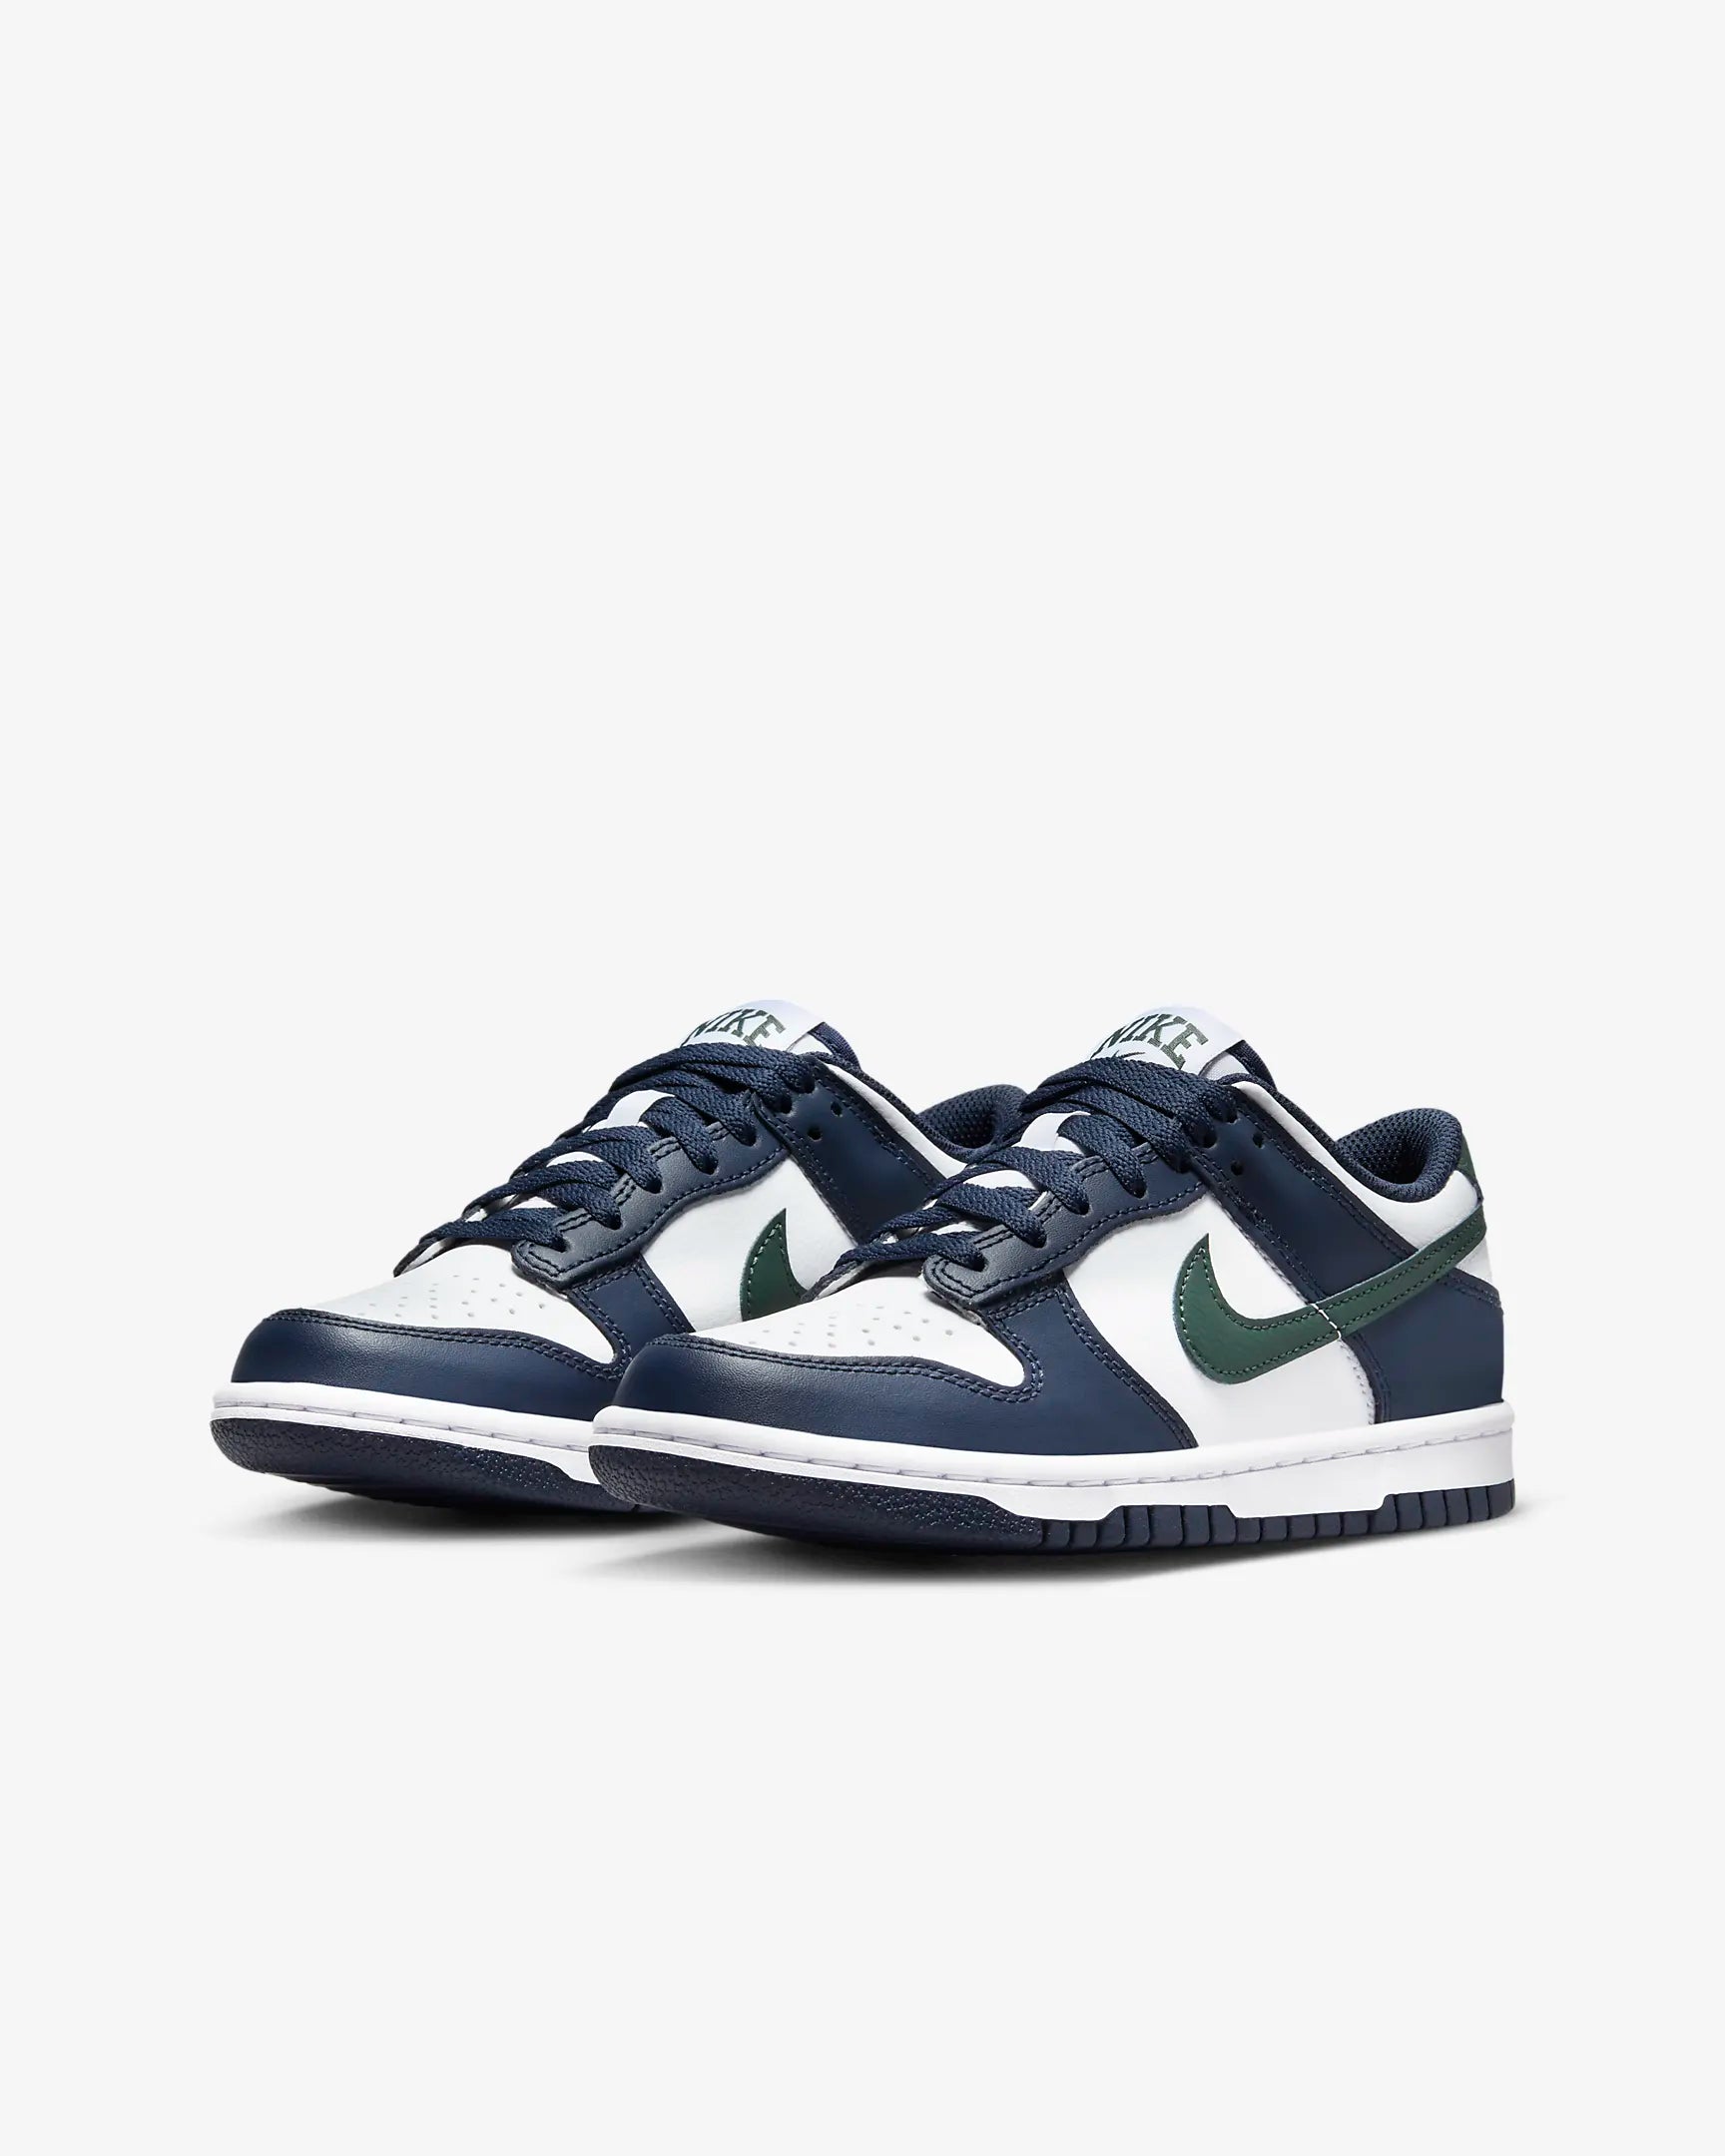 nike lunar peg 89 purchase code for sale